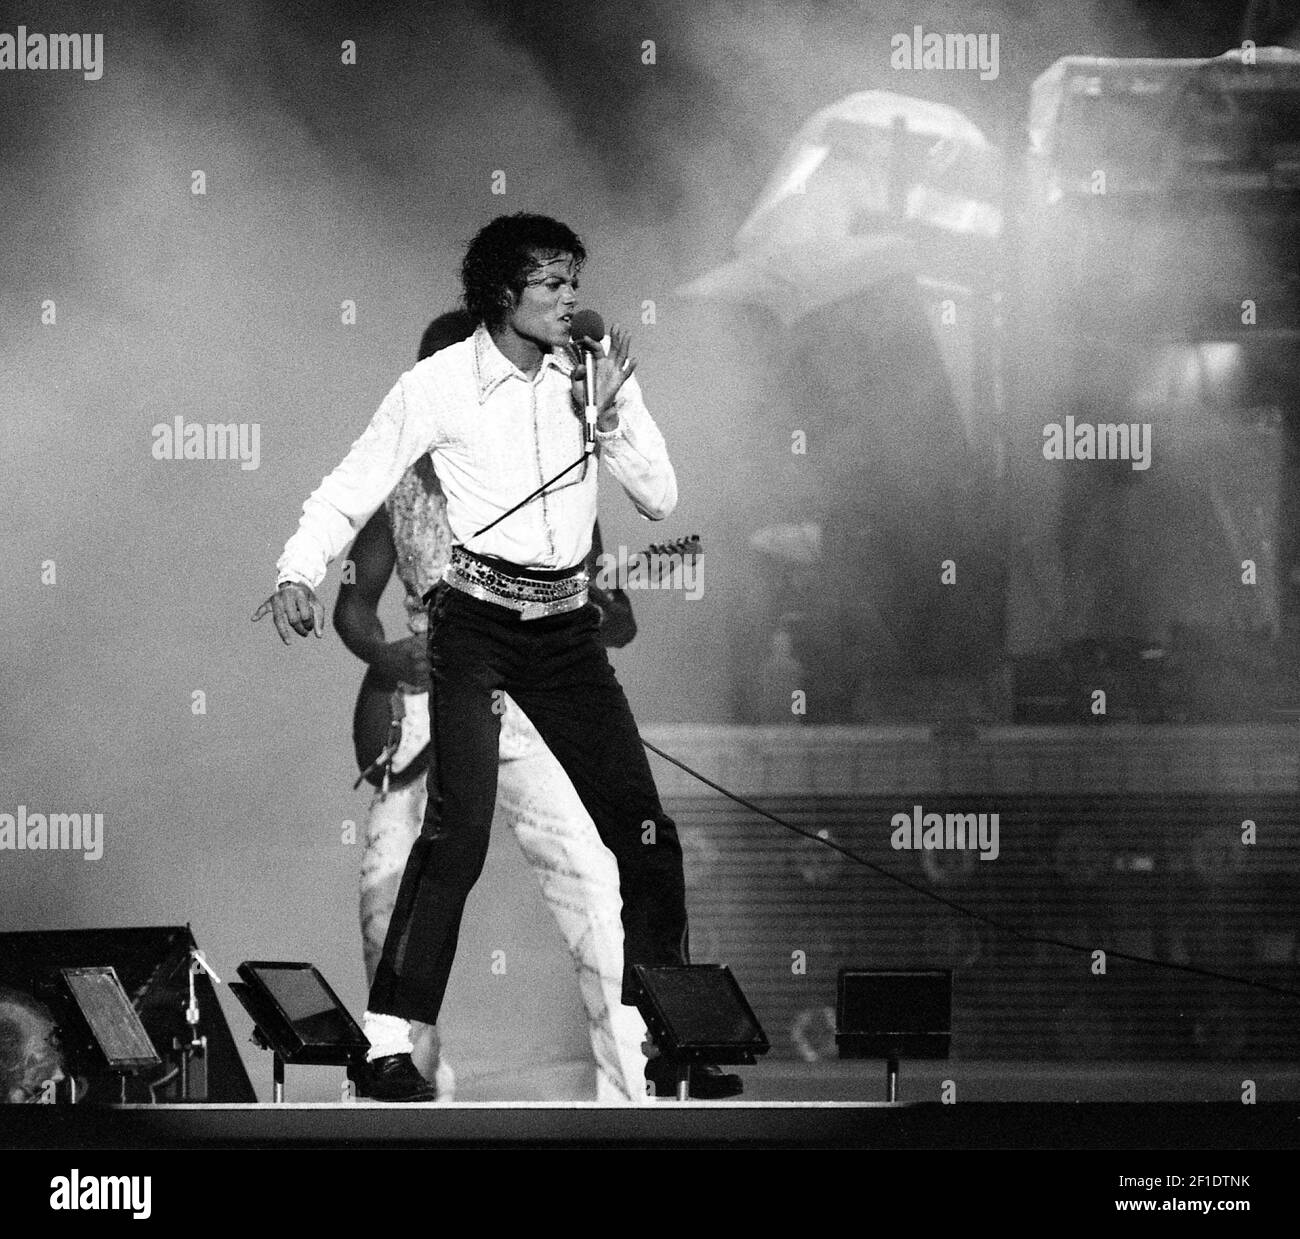 Aug. 10, 1984; Knoxville, TN, USA; Michael Jackson performs some of his hits from his 'Thriller' album, the biggest-selling album in history, during the Jacksons' 'Victory Tour' in Knoxville, Tenn. Aug. 10, 1984.Mandatory Credit: Ricky Rogers / The Tennessean via USA TODAY NETWORK/Sipa USA Stock Photo